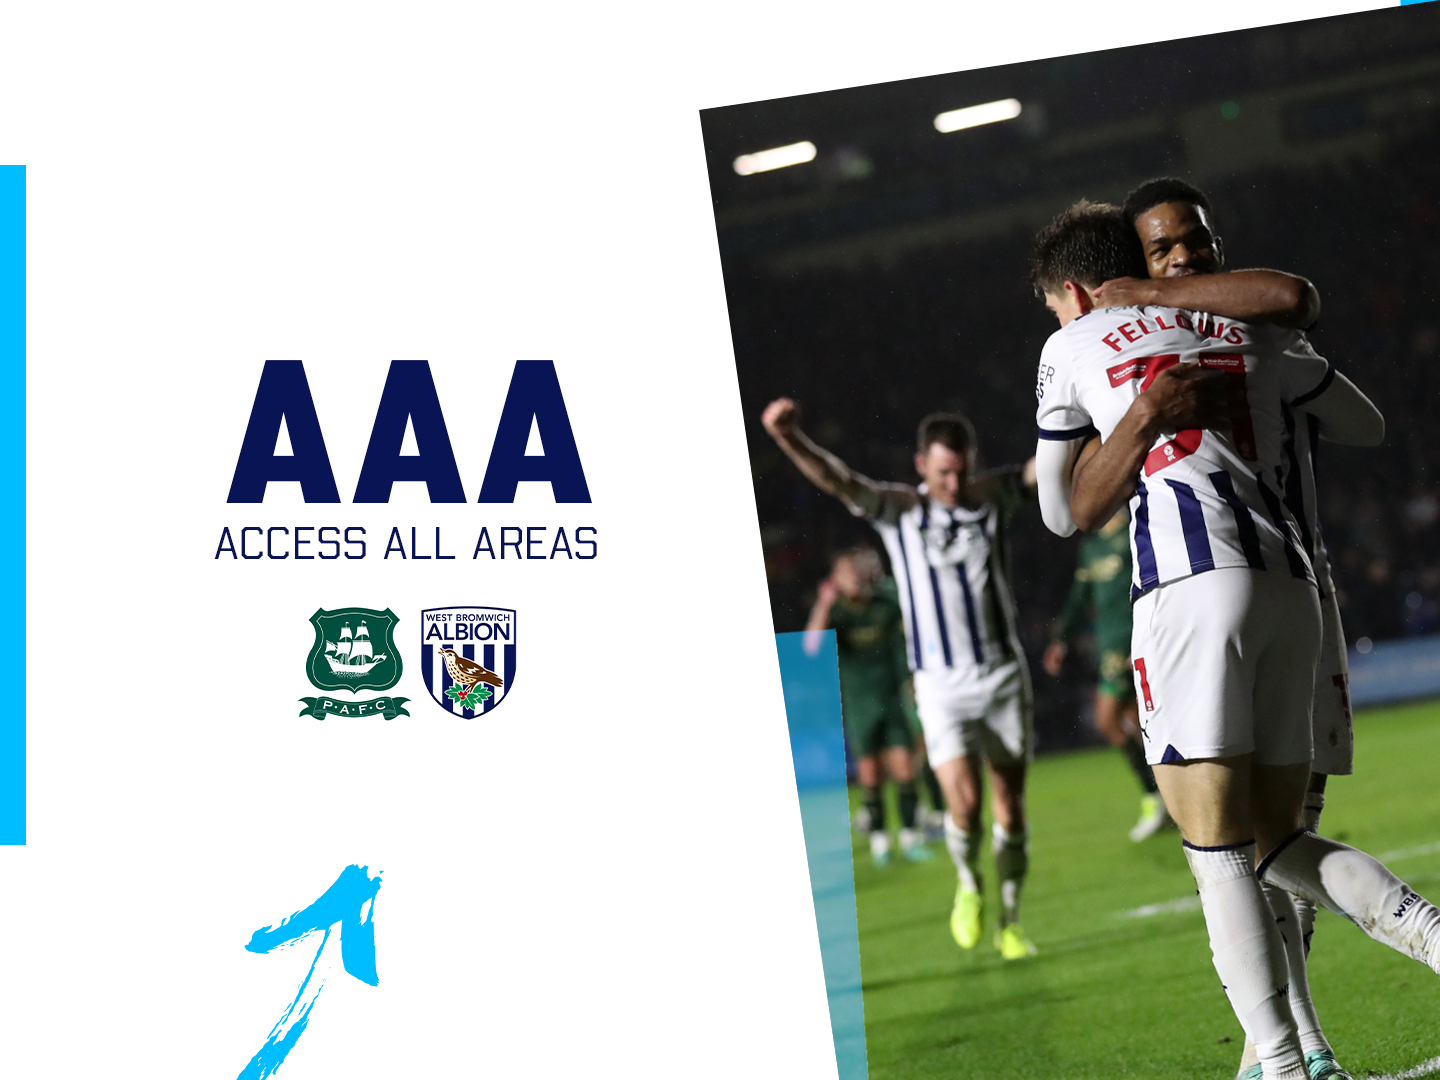 A photo graphic, showing Grady Diangana and Tom Fellows celebrating, with the title 'Access All Areas' for Albion's away match v Plymouth